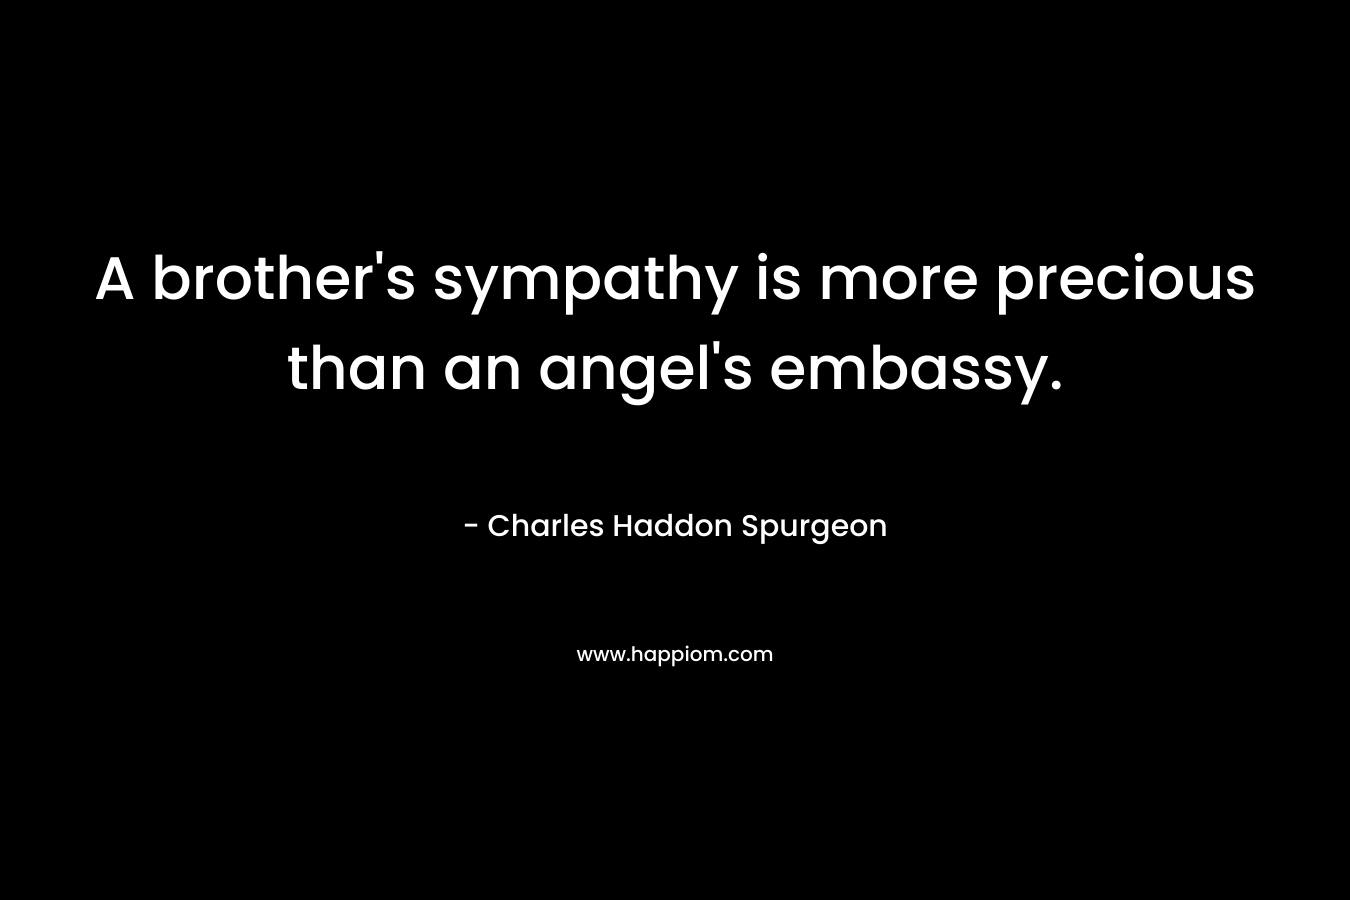 A brother’s sympathy is more precious than an angel’s embassy. – Charles Haddon Spurgeon